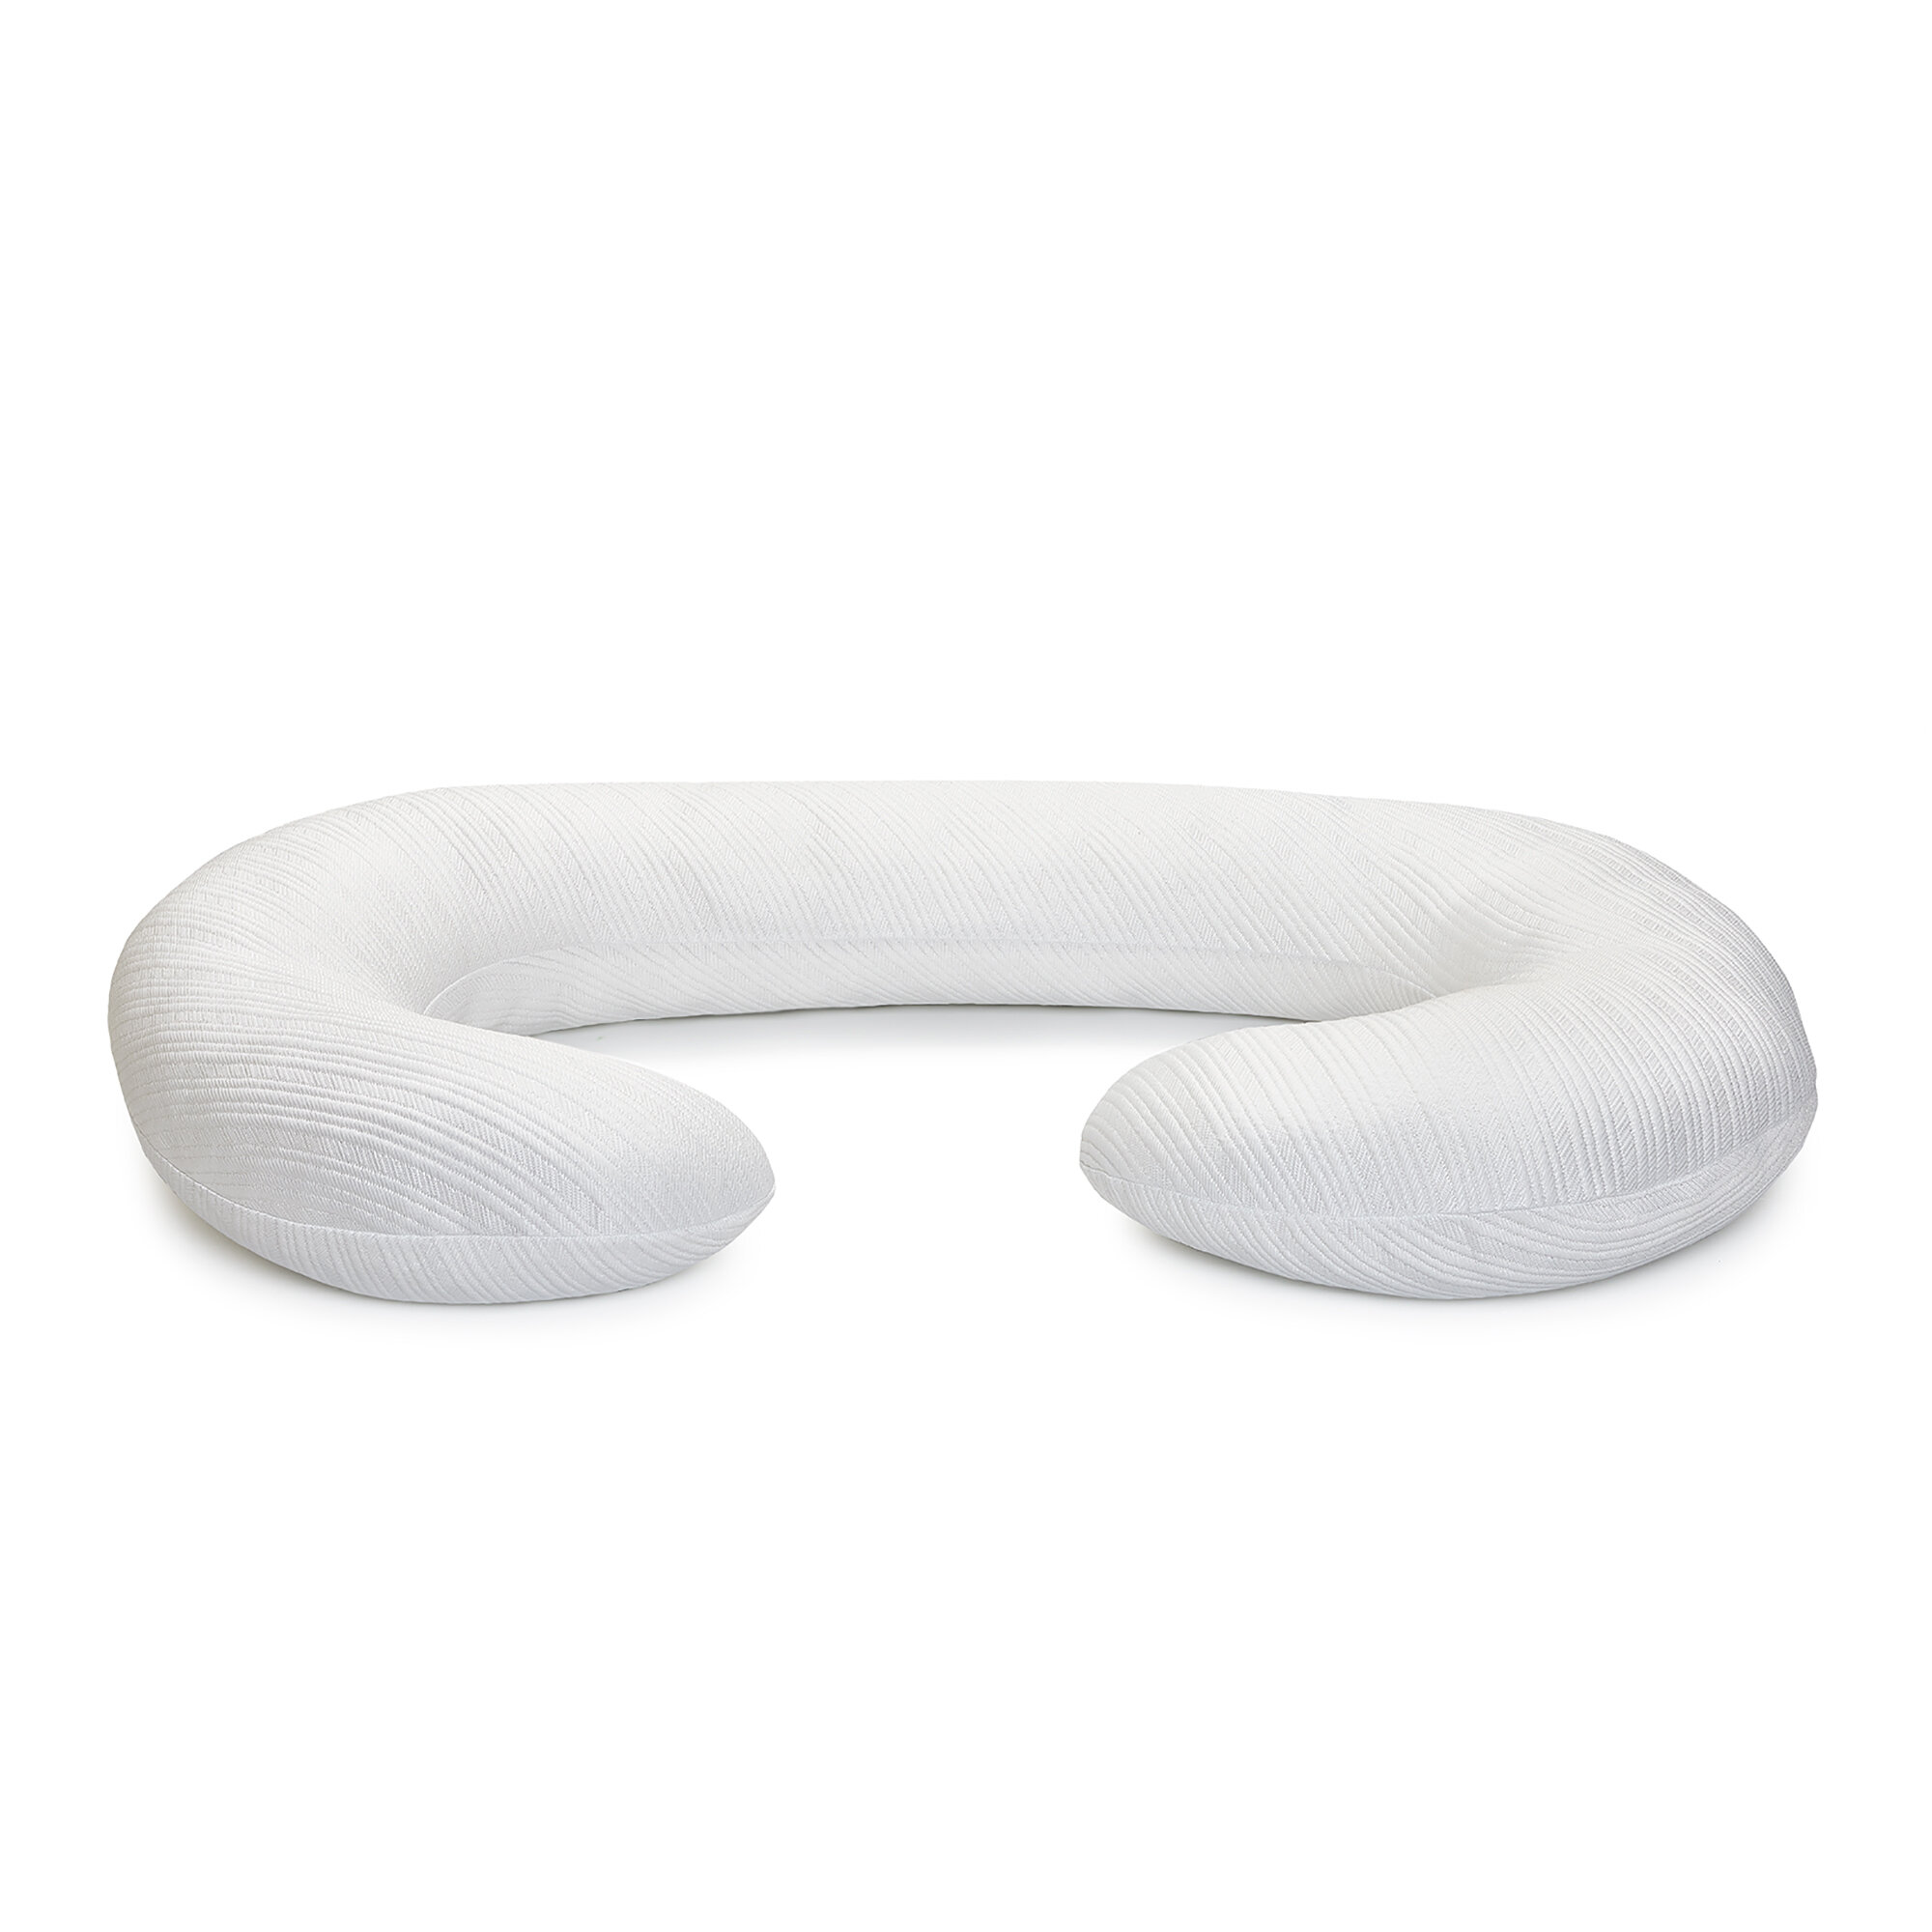 Cushy Form Knee Pillow - Daily Therapy